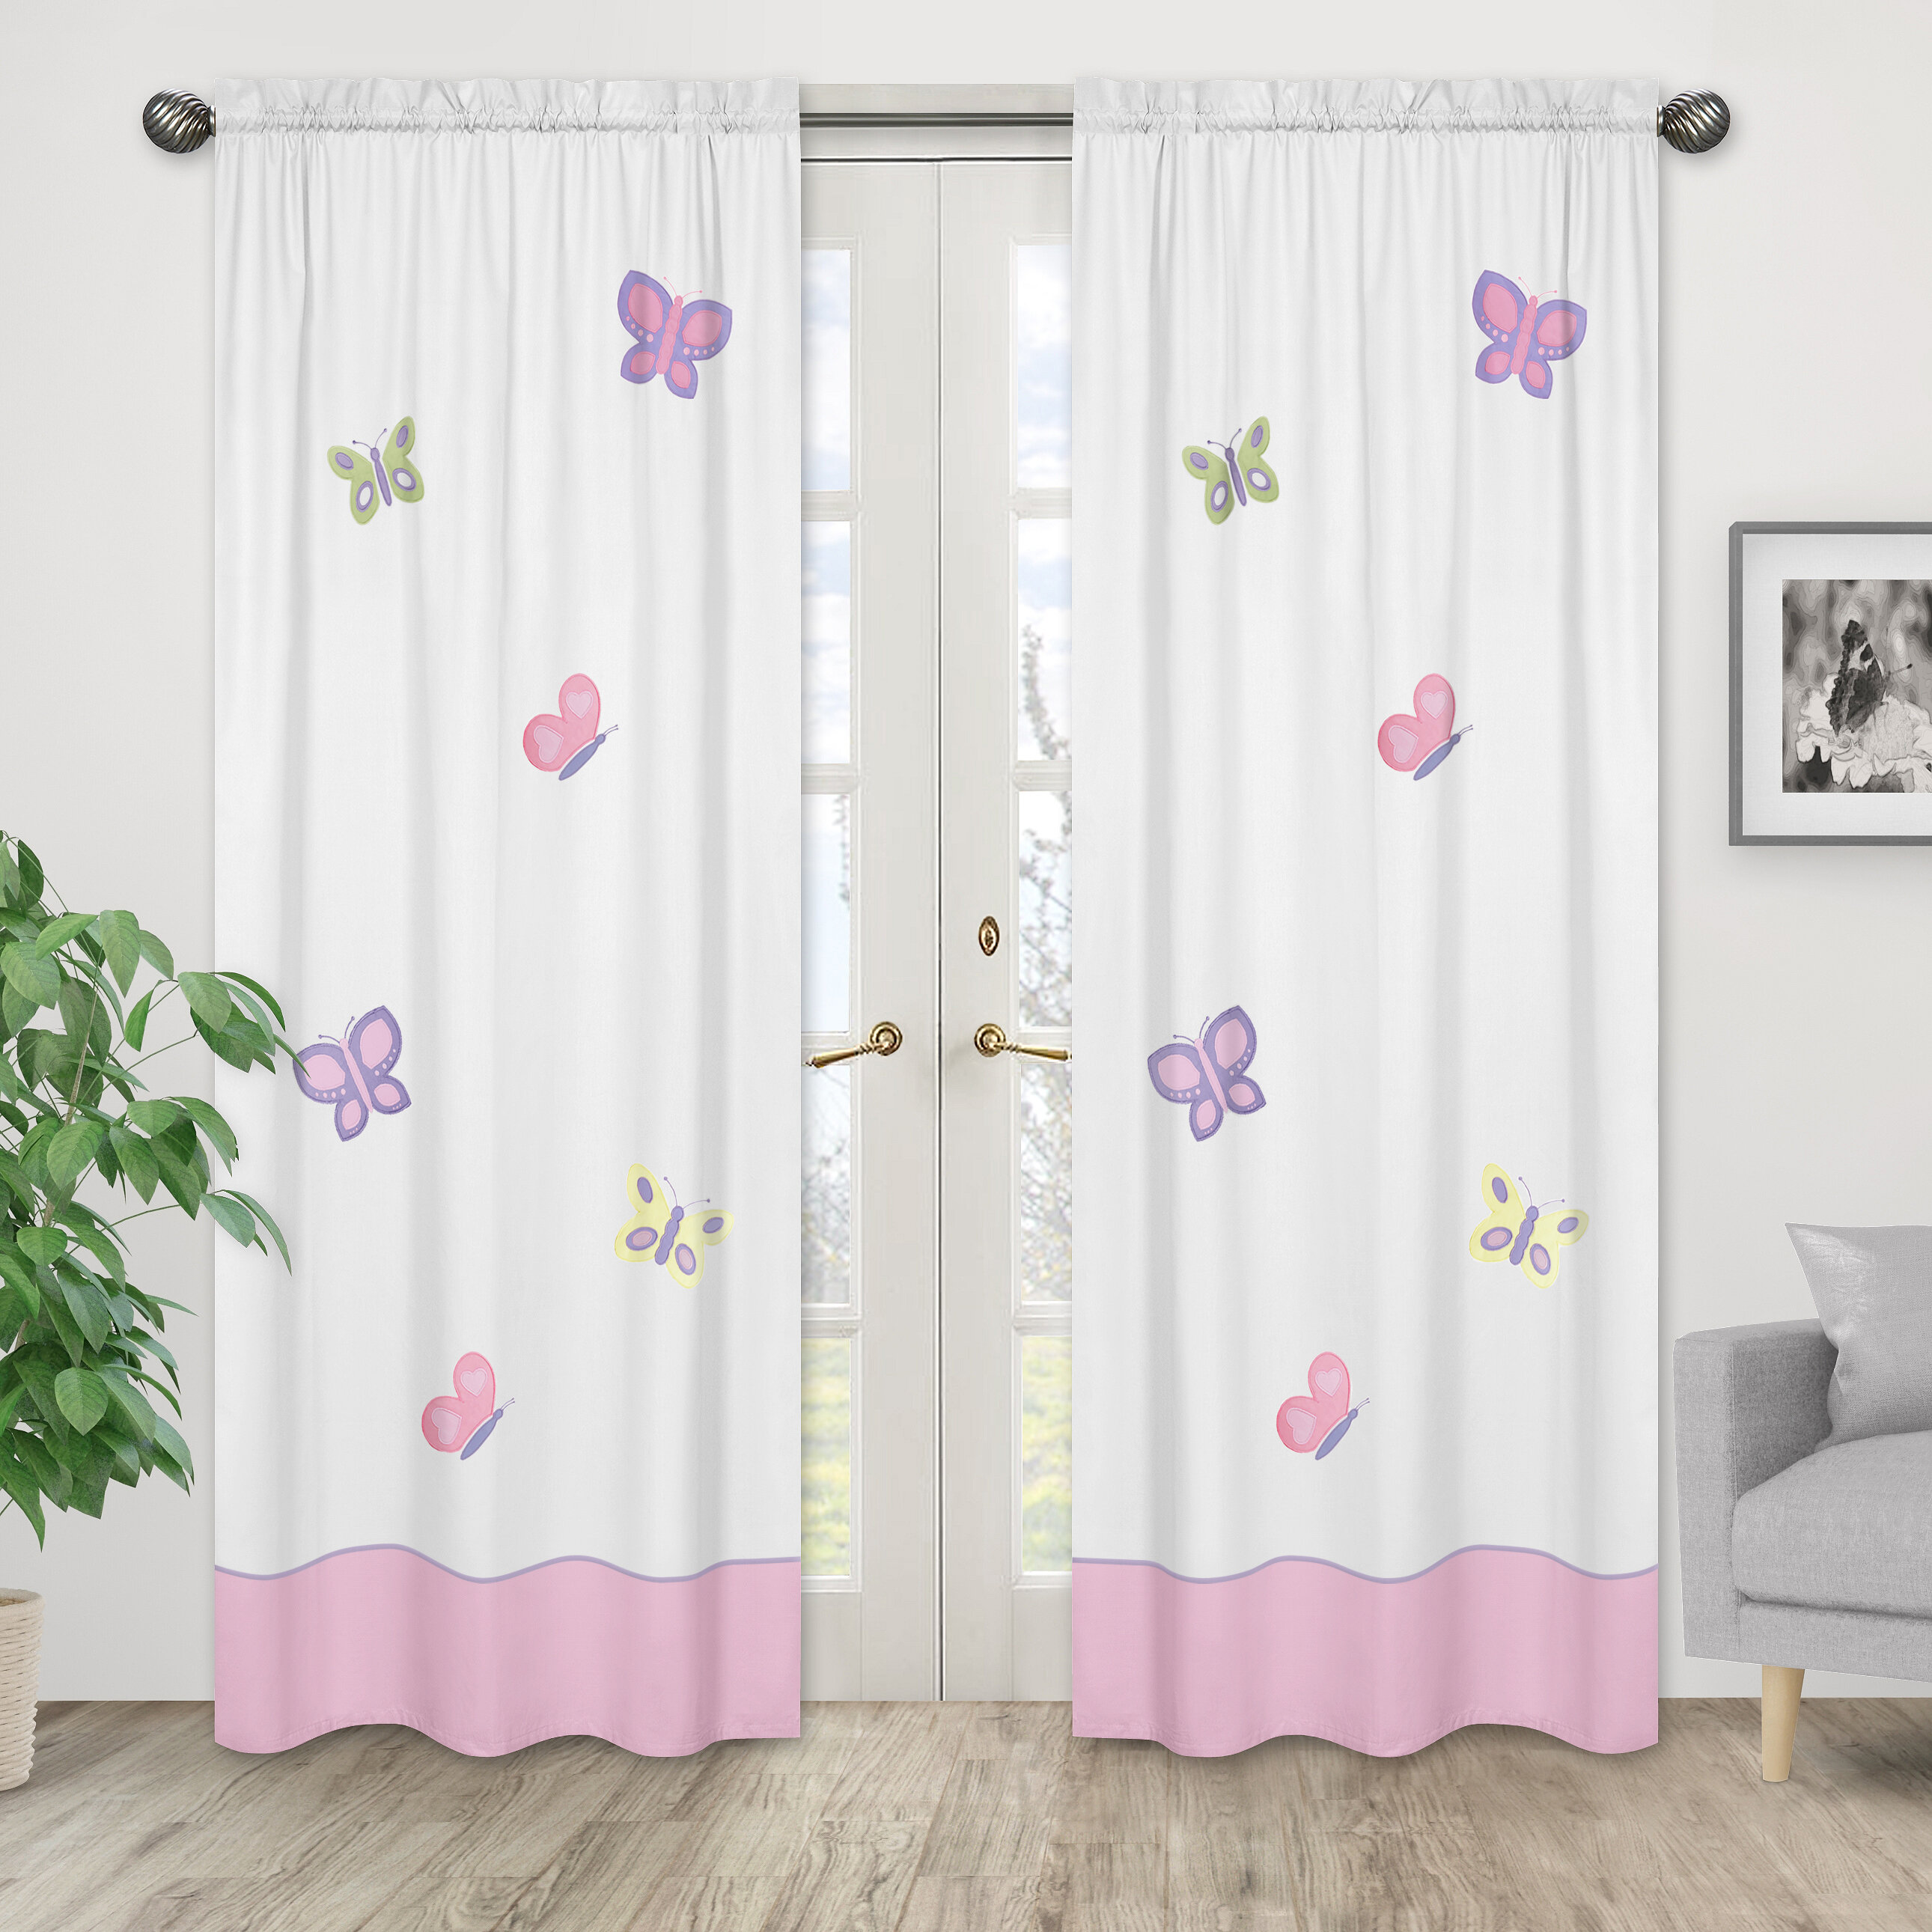 Set of 2 Panels 2 Layers Voile Sheer Rod Pocket Window Curtain Panel and Valance 